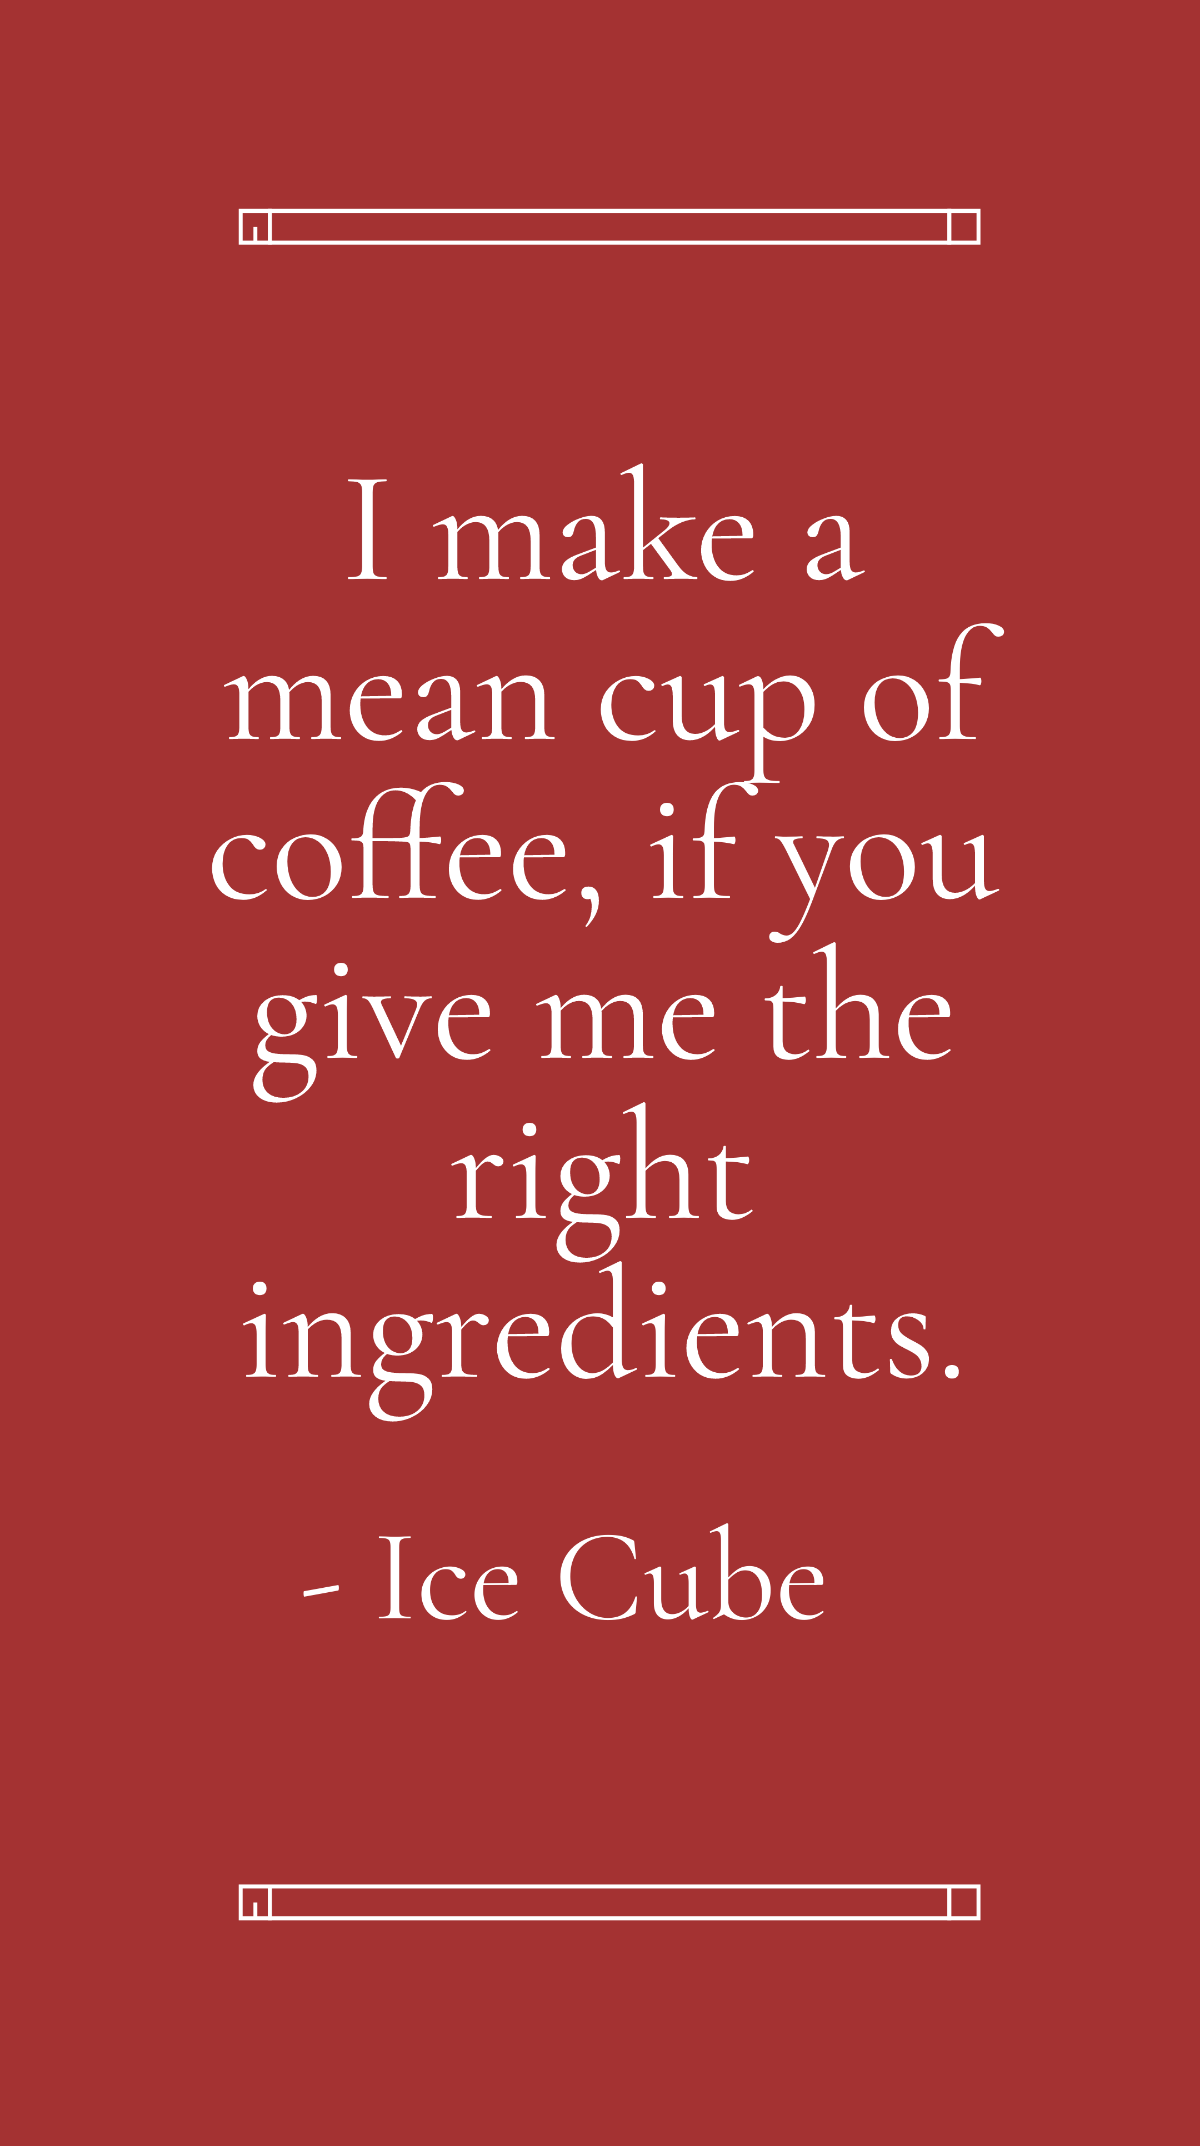 Ice Cube - I make a mean cup of coffee, if you give me the right ingredients. Template